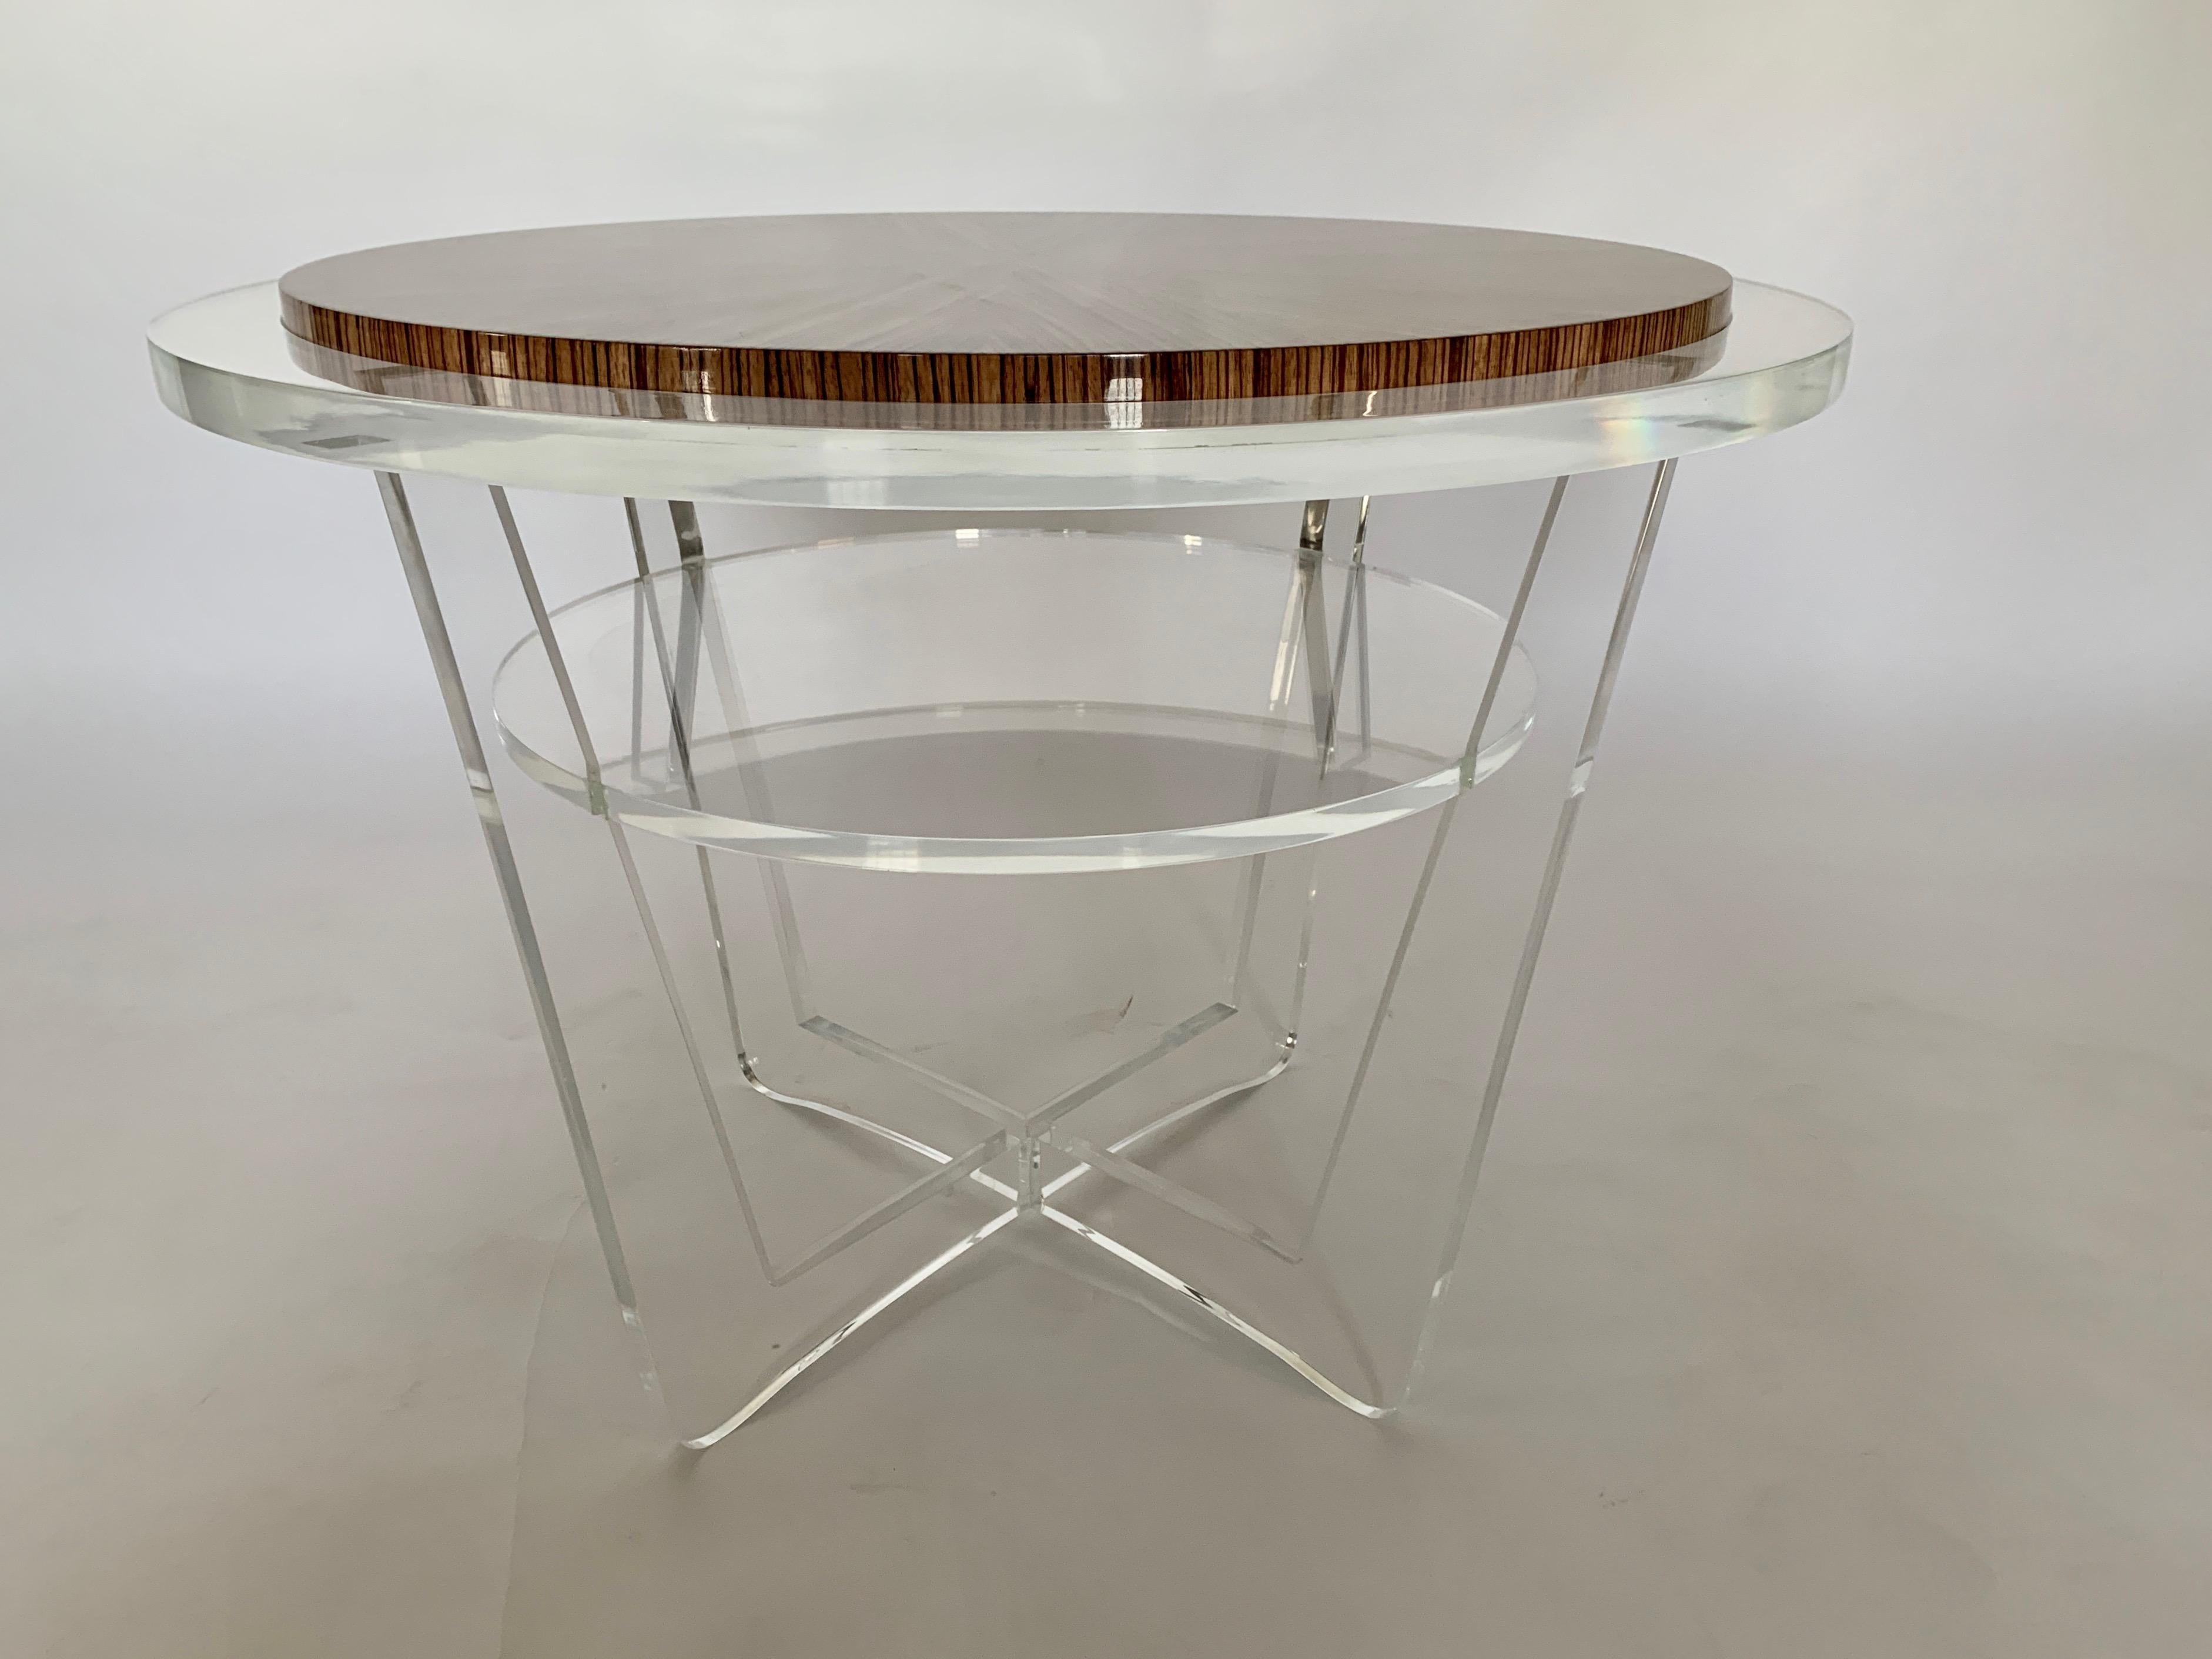 This Jonathan Franc Cocktail Table has around Zebra wood inset top with a 3